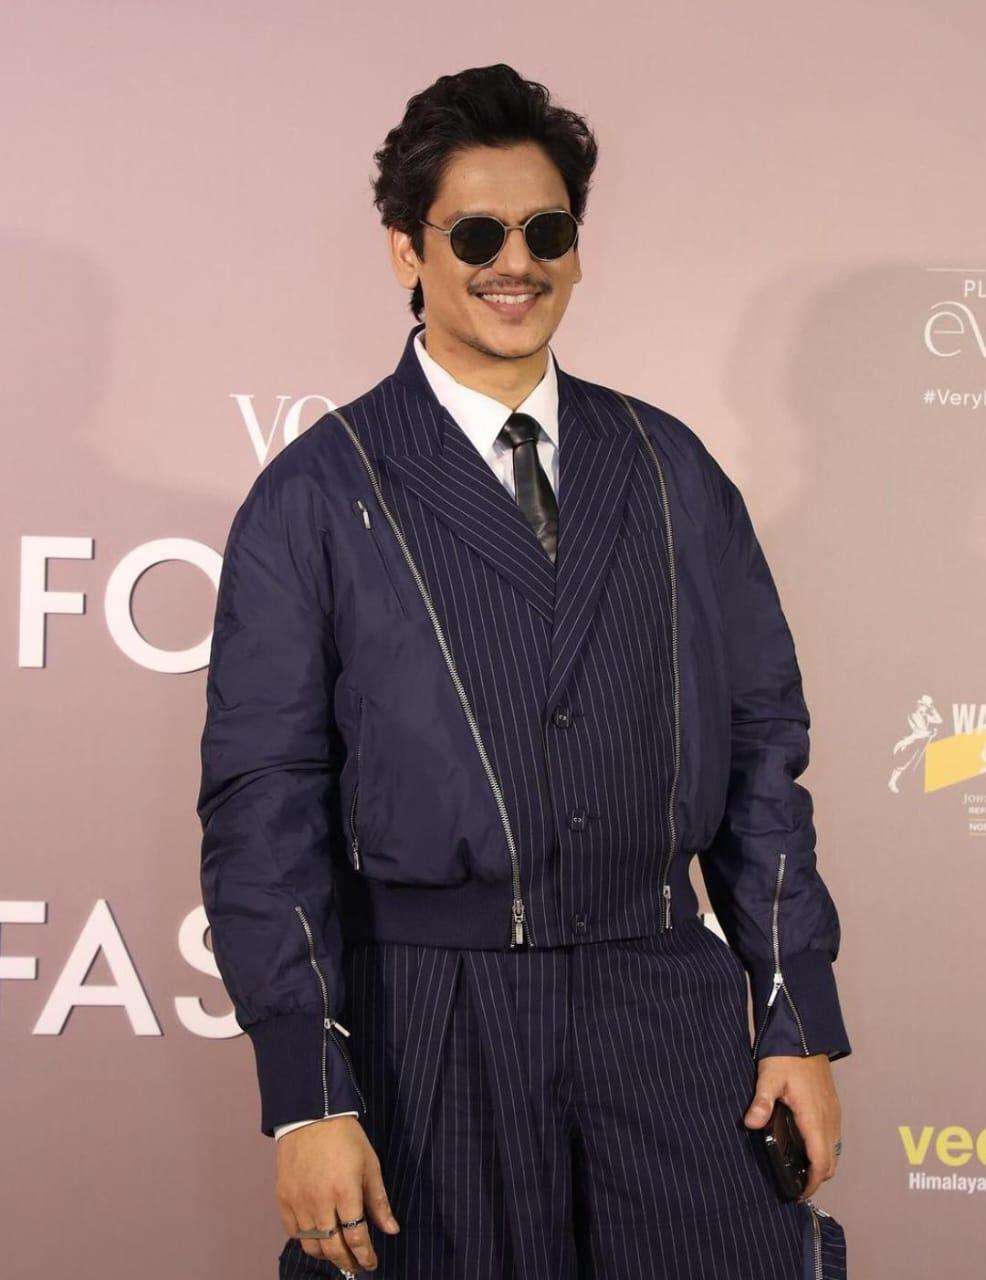 Vijay Varma has carved a niche for himself by seamlessly blending contemporary aesthetics with glamorous undertones. His red carpet appearances and casual street style alike exude a sense of sophistication, making him a style icon for those who appreciate the perfect balance between modern trends and classic elegance.